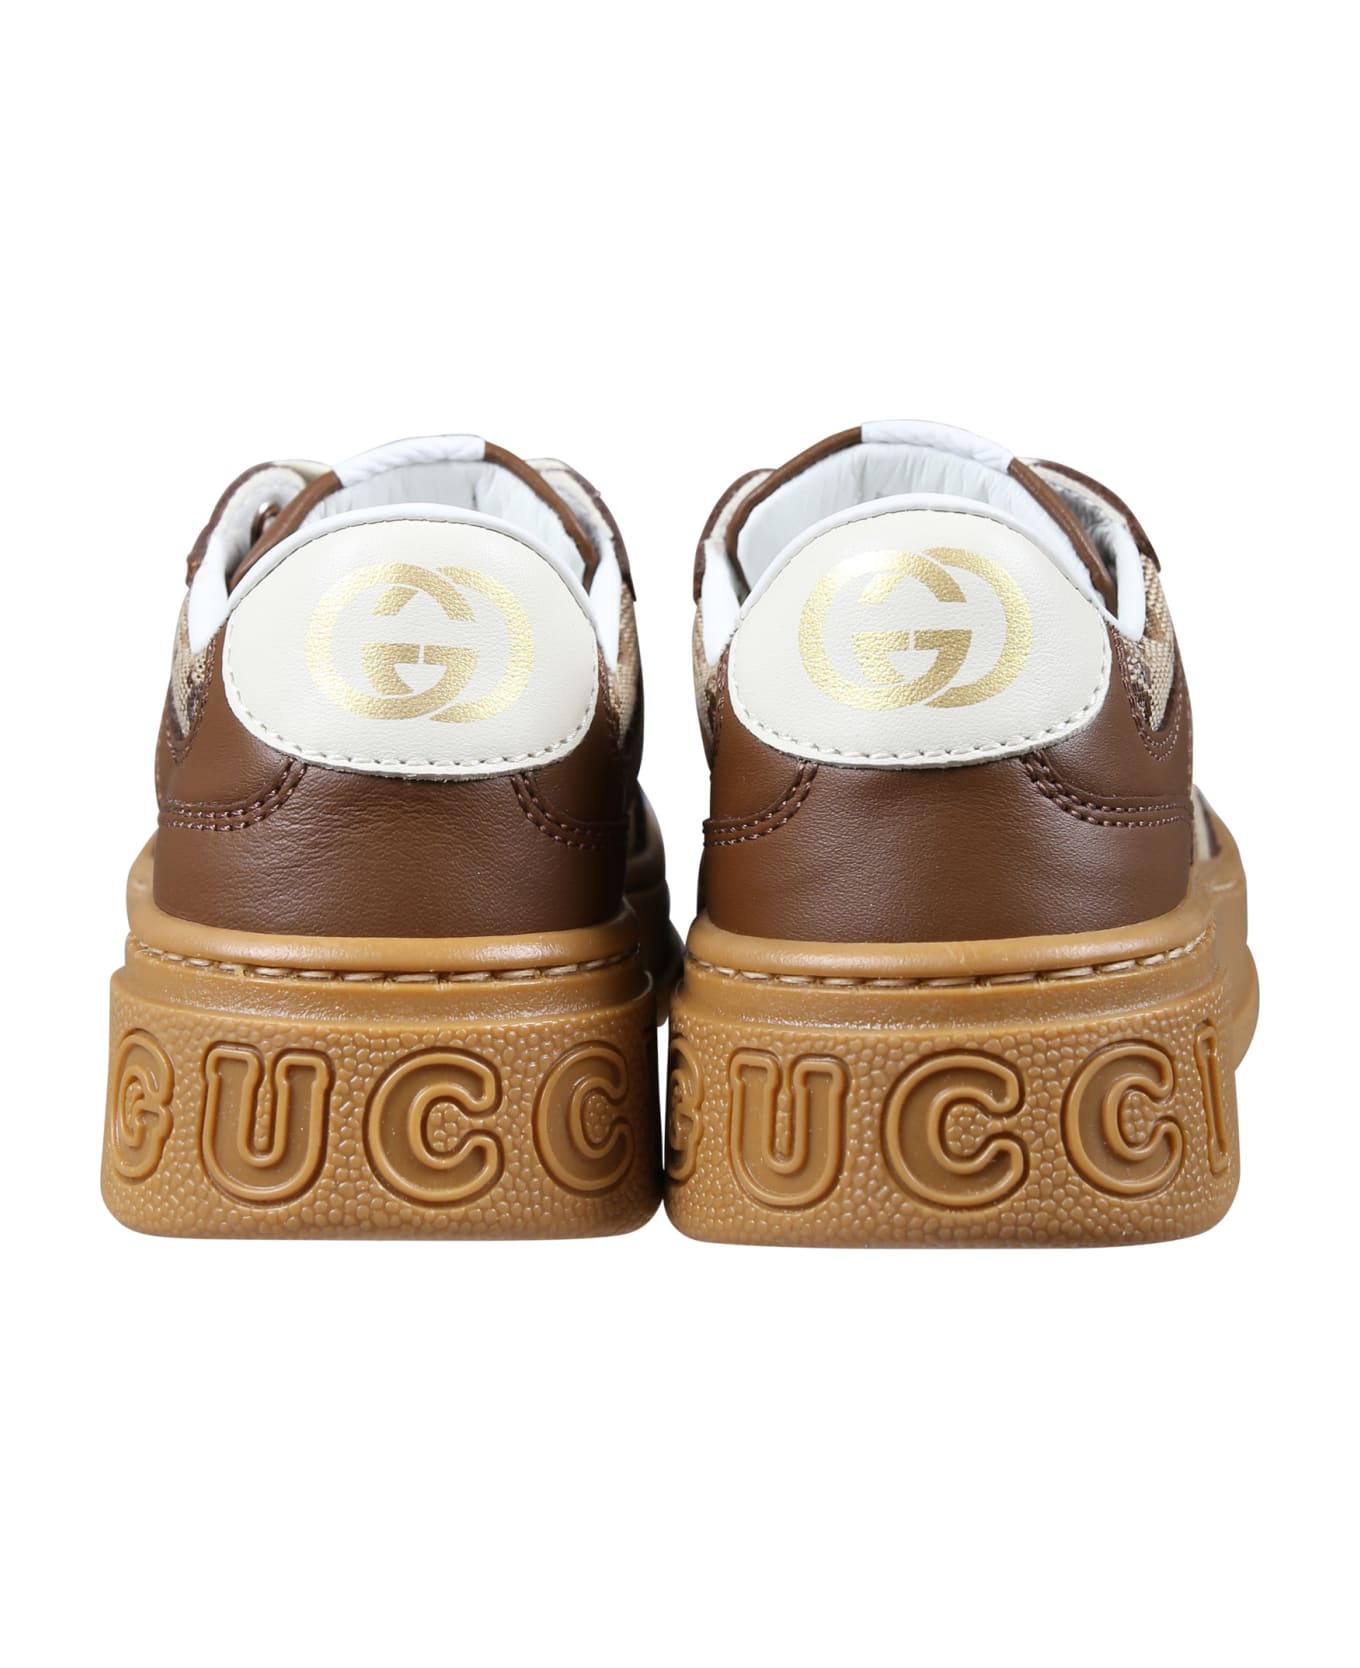 Gucci Brown Sneakers For Kids With Iconic Gg - Brown シューズ